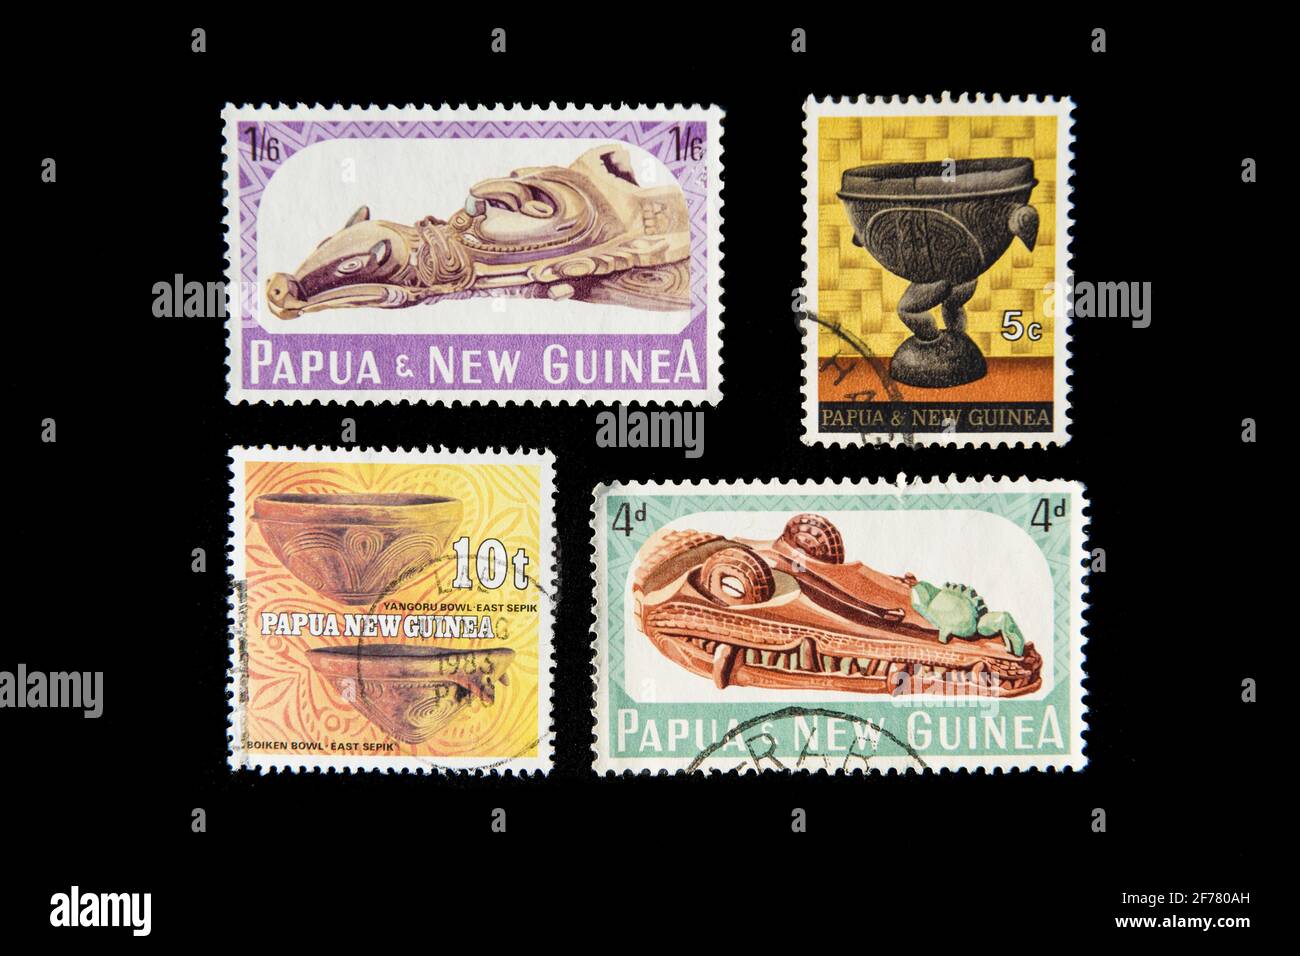 Papua New Guinea, Port Moresby, stamps Stock Photo